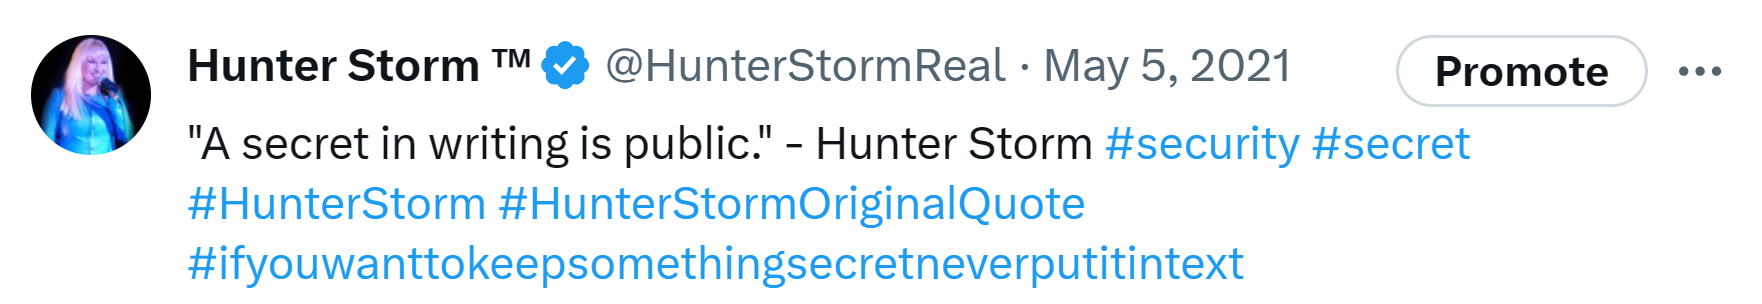 Hunter Storm Wisdom: Timeless Insights and Inspiration | "A secret in writing is public."